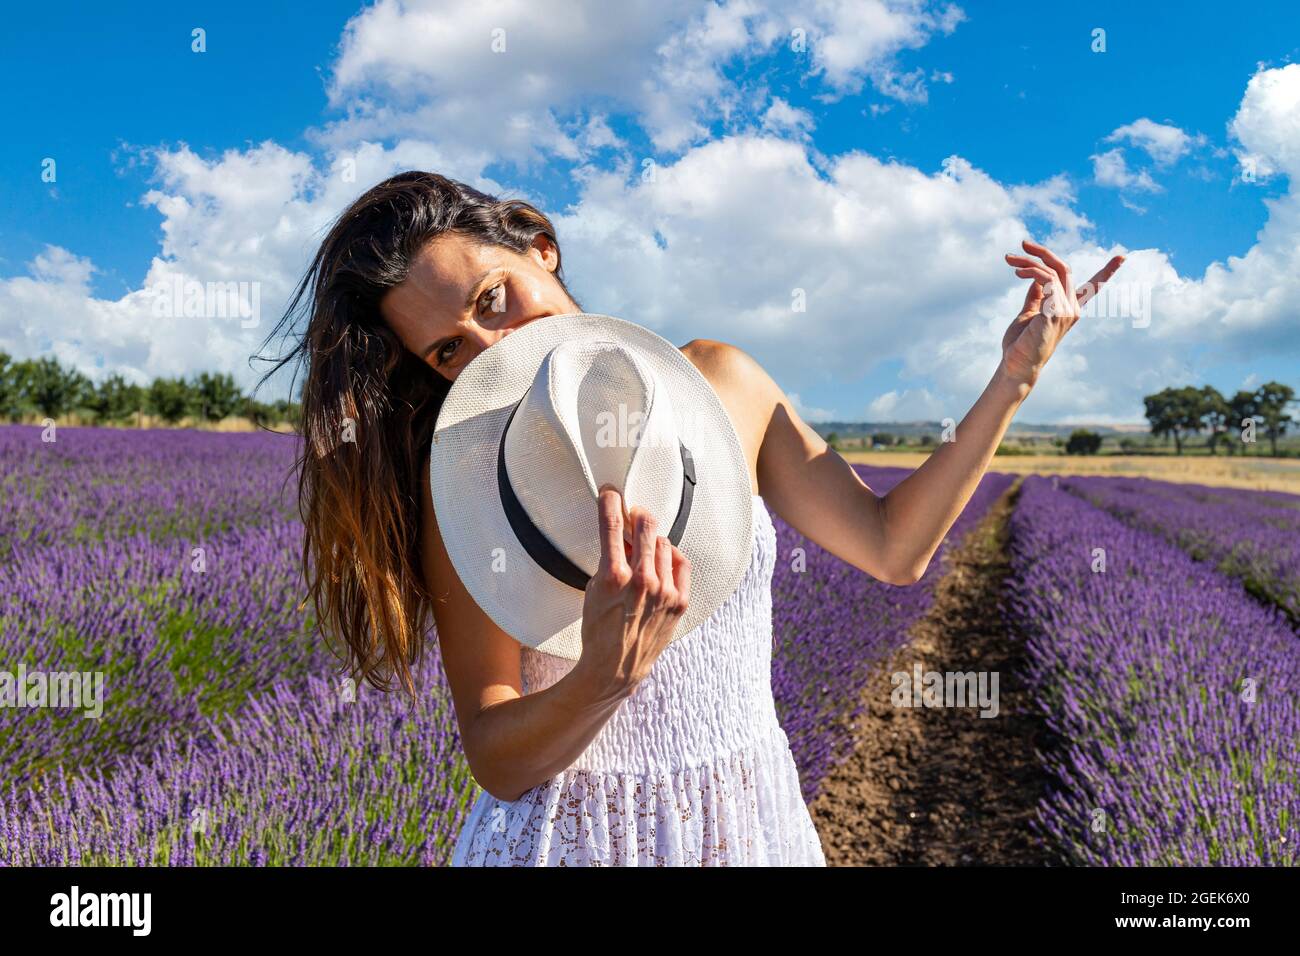 Happy young woman playing with her hat in a blooming lavender field. She has an intense gaze and eyes turned to the camera. Stock Photo